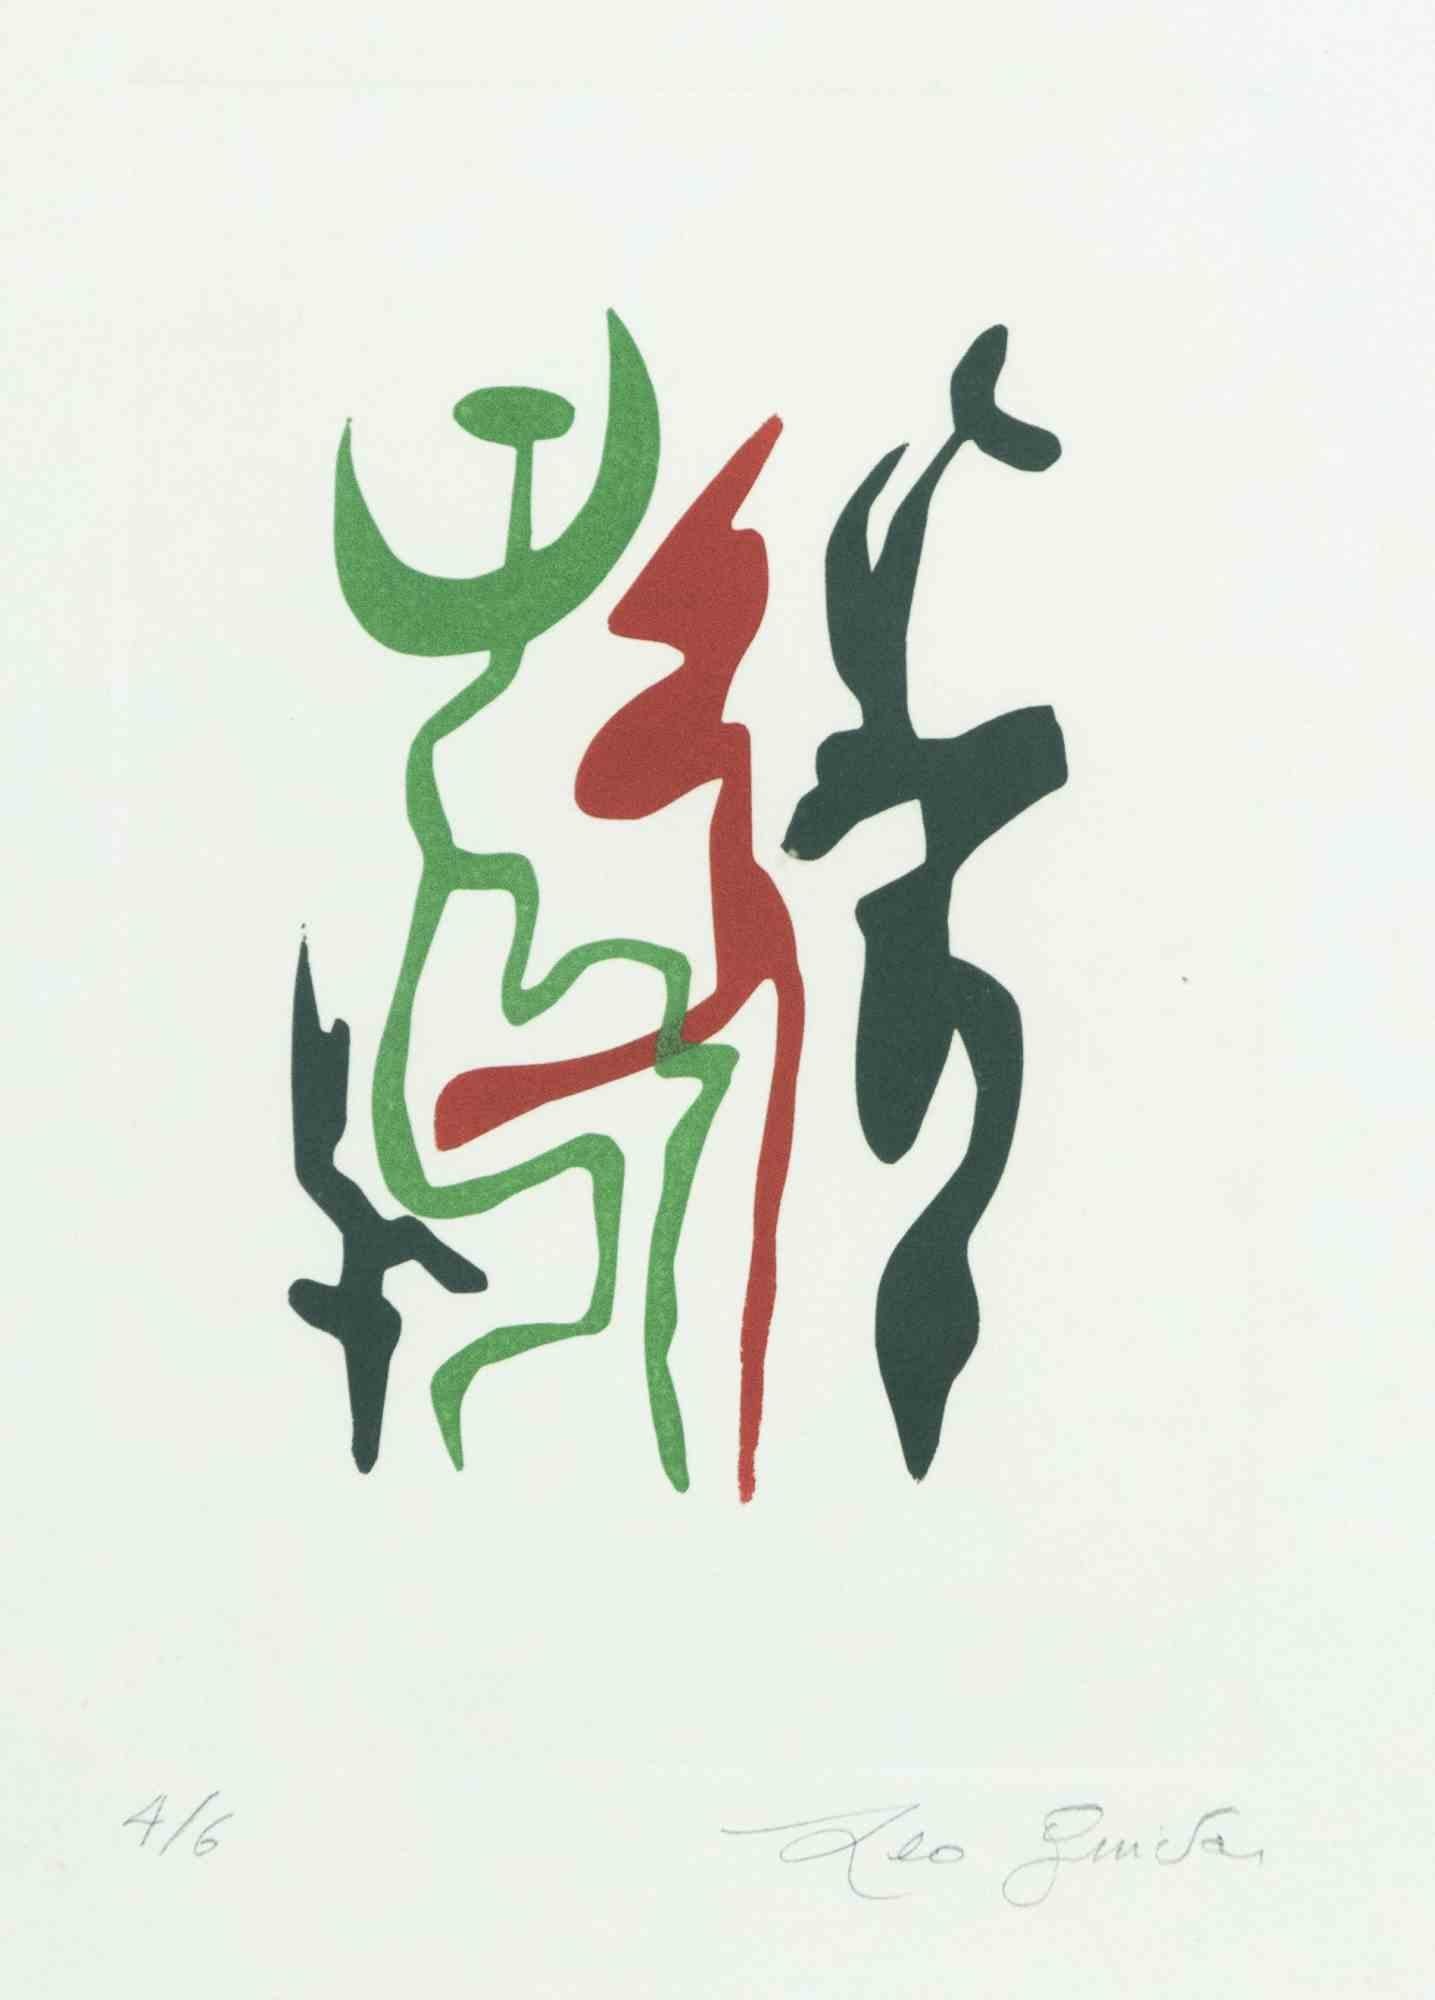 Abstract composition is an original Contemporary artwork realized in 1970s by the italian Contemporary artist Leo Guida (1992 - 2017).

Original mixed colored lithograph.

Hand signed and numbered on the lower right margin. Edition of